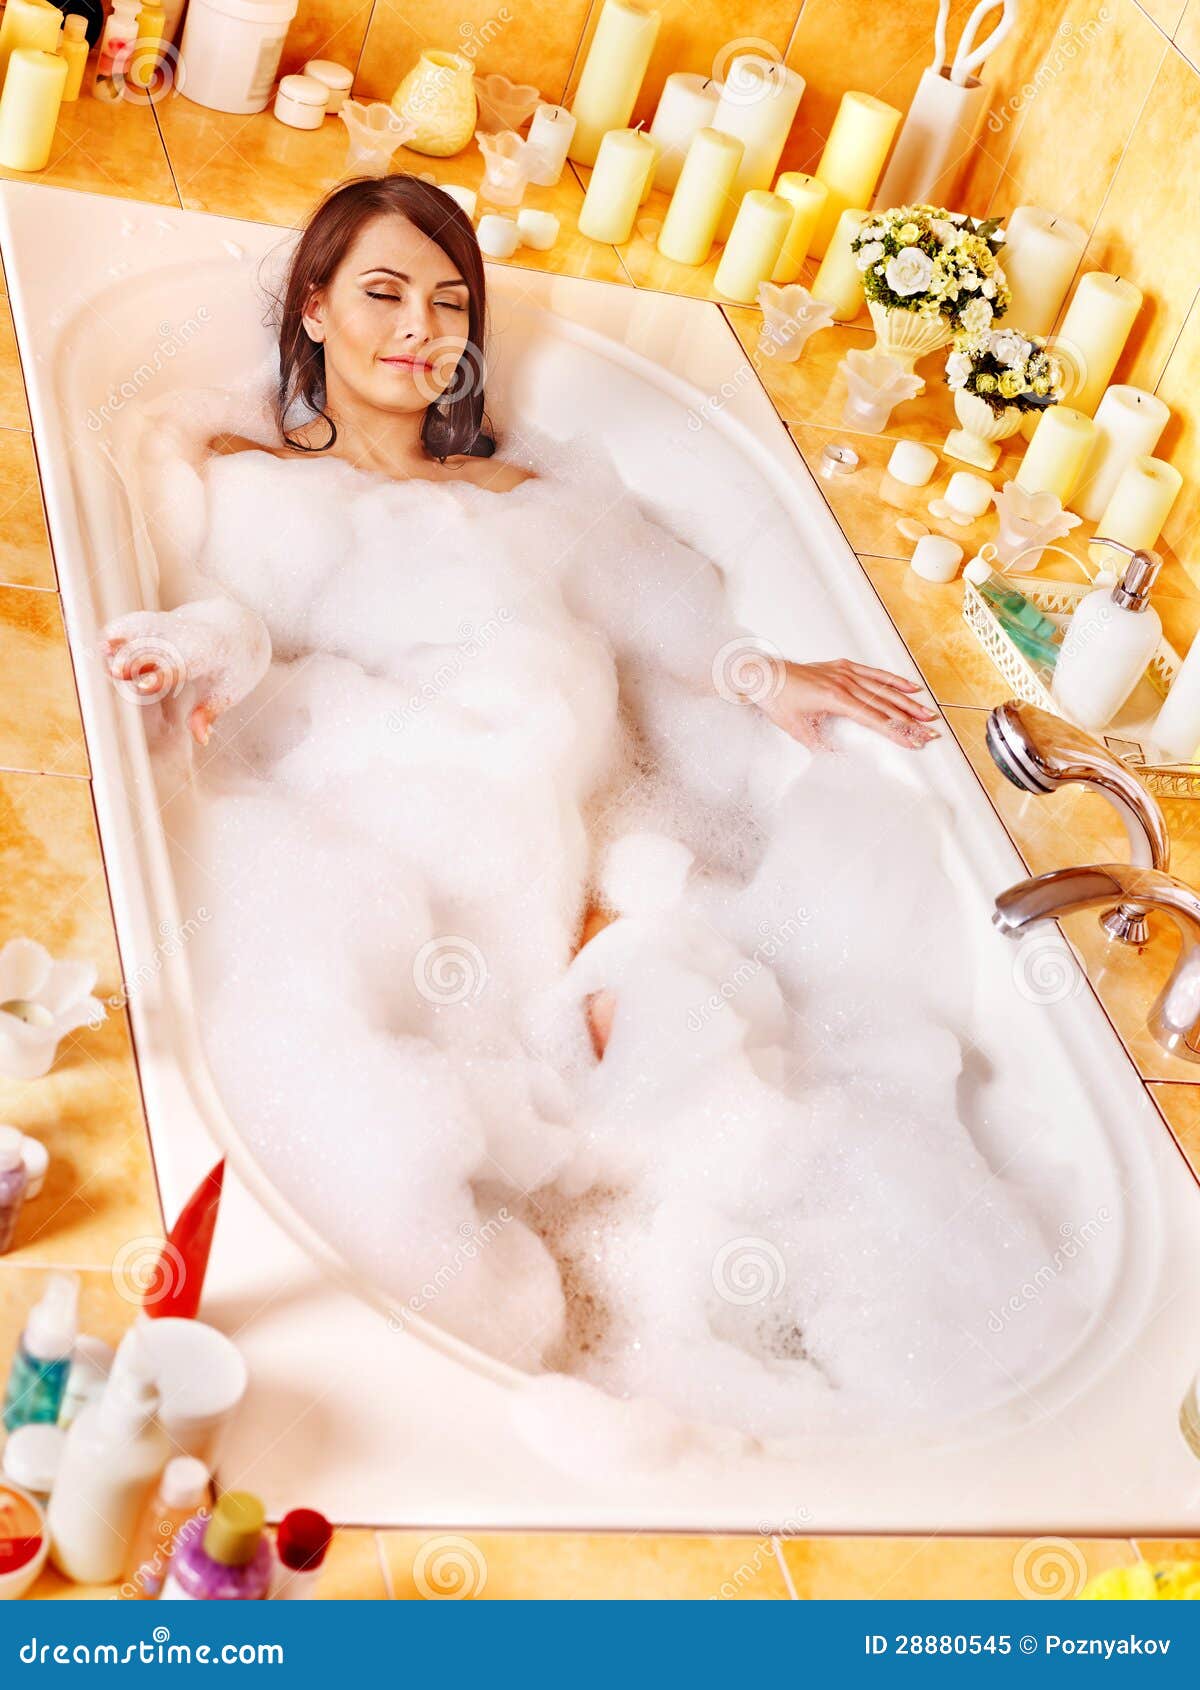 Woman Relaxing At Bubble Bath Stock Image Image 28880545